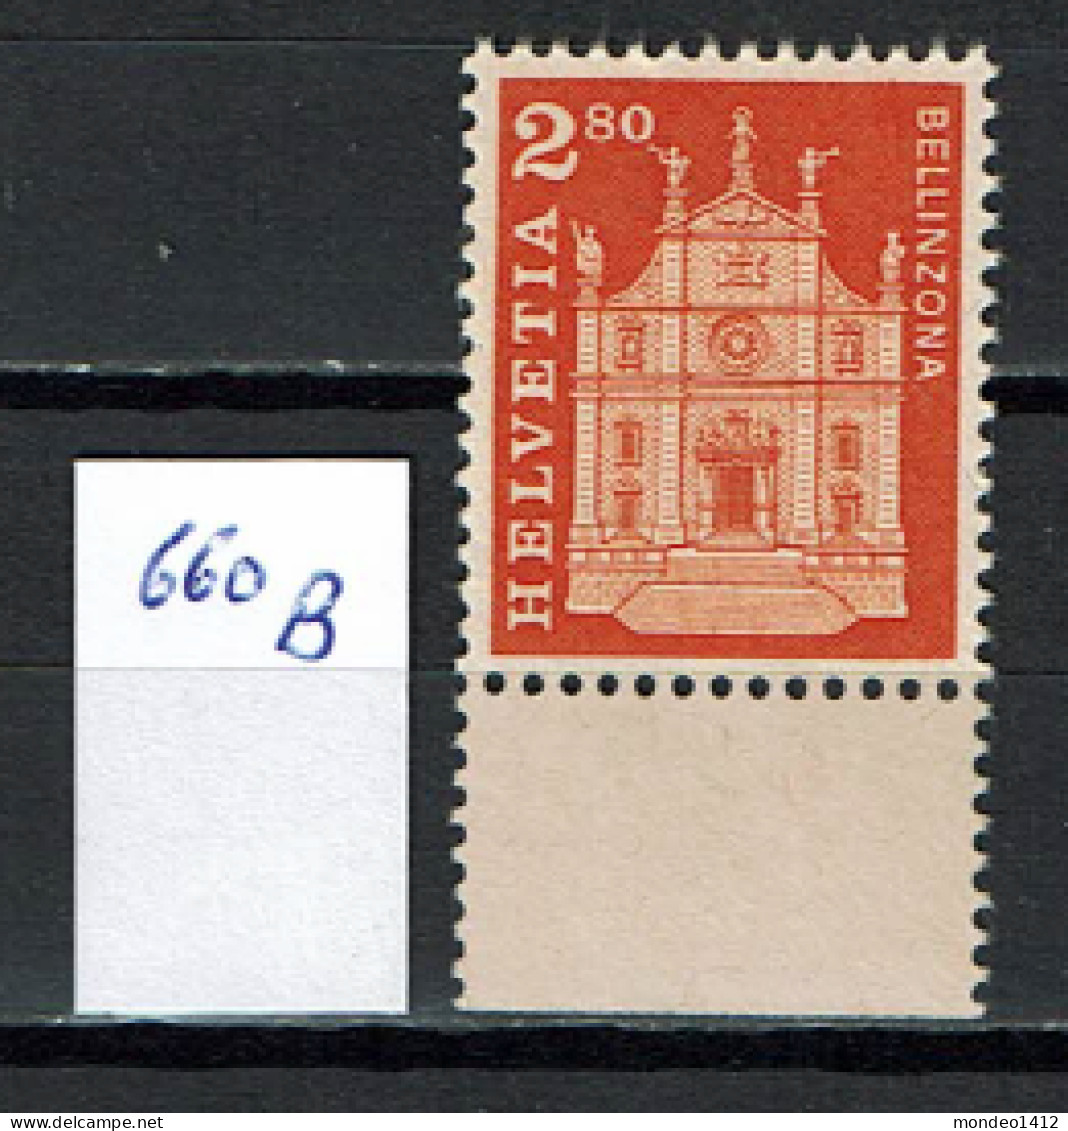 Suisse 1960 - YT 660 B ** MNH - Unused Stamps